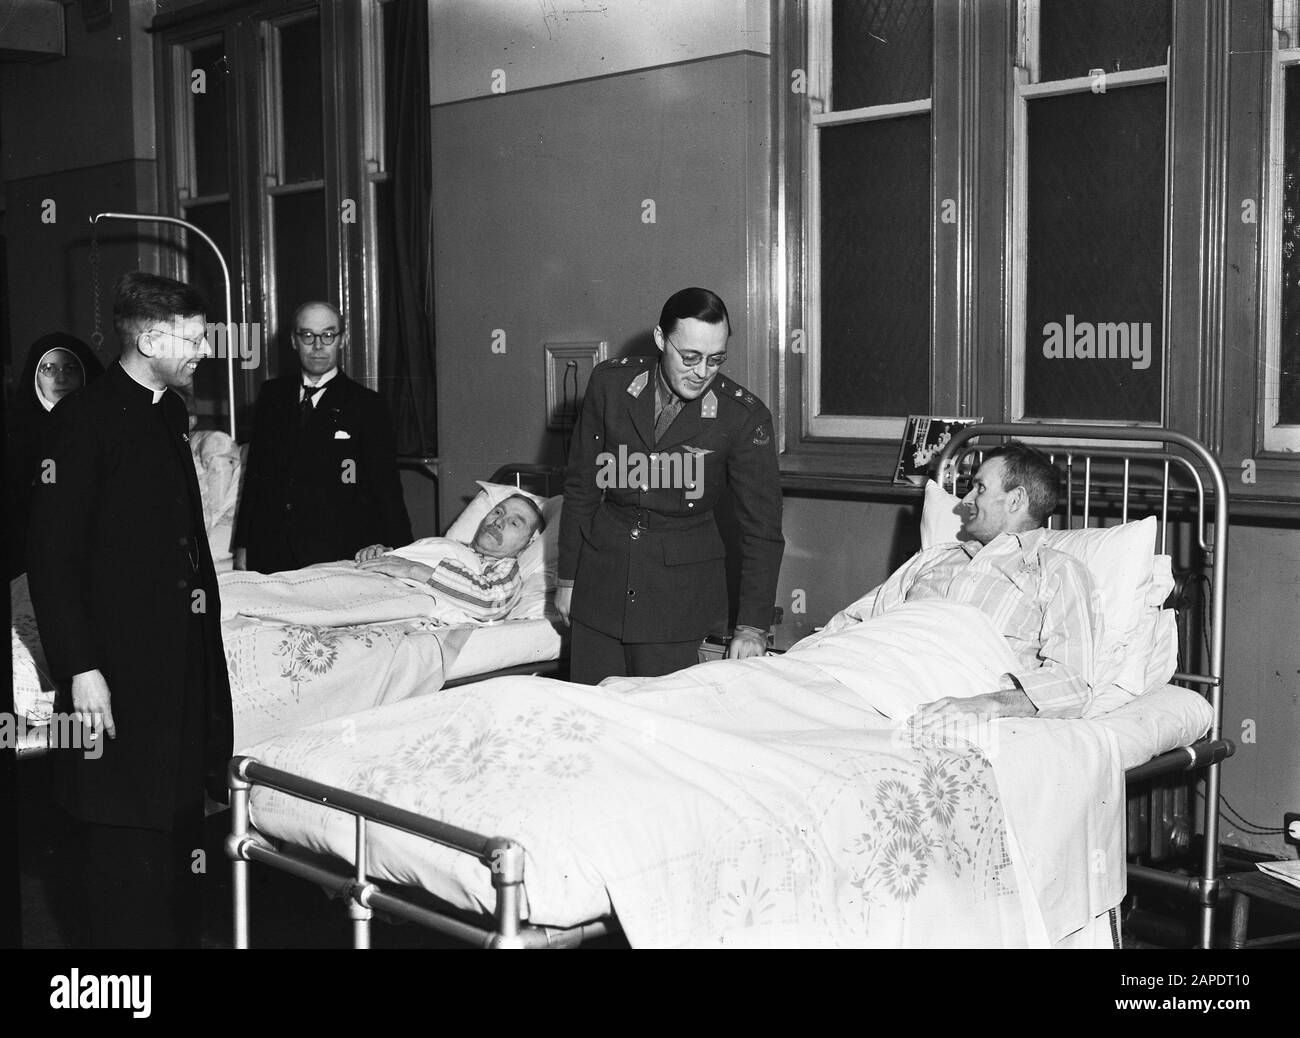 HIE [Holland in England]/Anefo London series Description: Visit of Prince Bernhard to St. Joseph Hospital at Preston Date: 1944 Location: Great Britain, Preston Keywords: visits, patients, princes, World War II, hospitals Personal name: Bernhard (prince Netherlands) Stock Photo